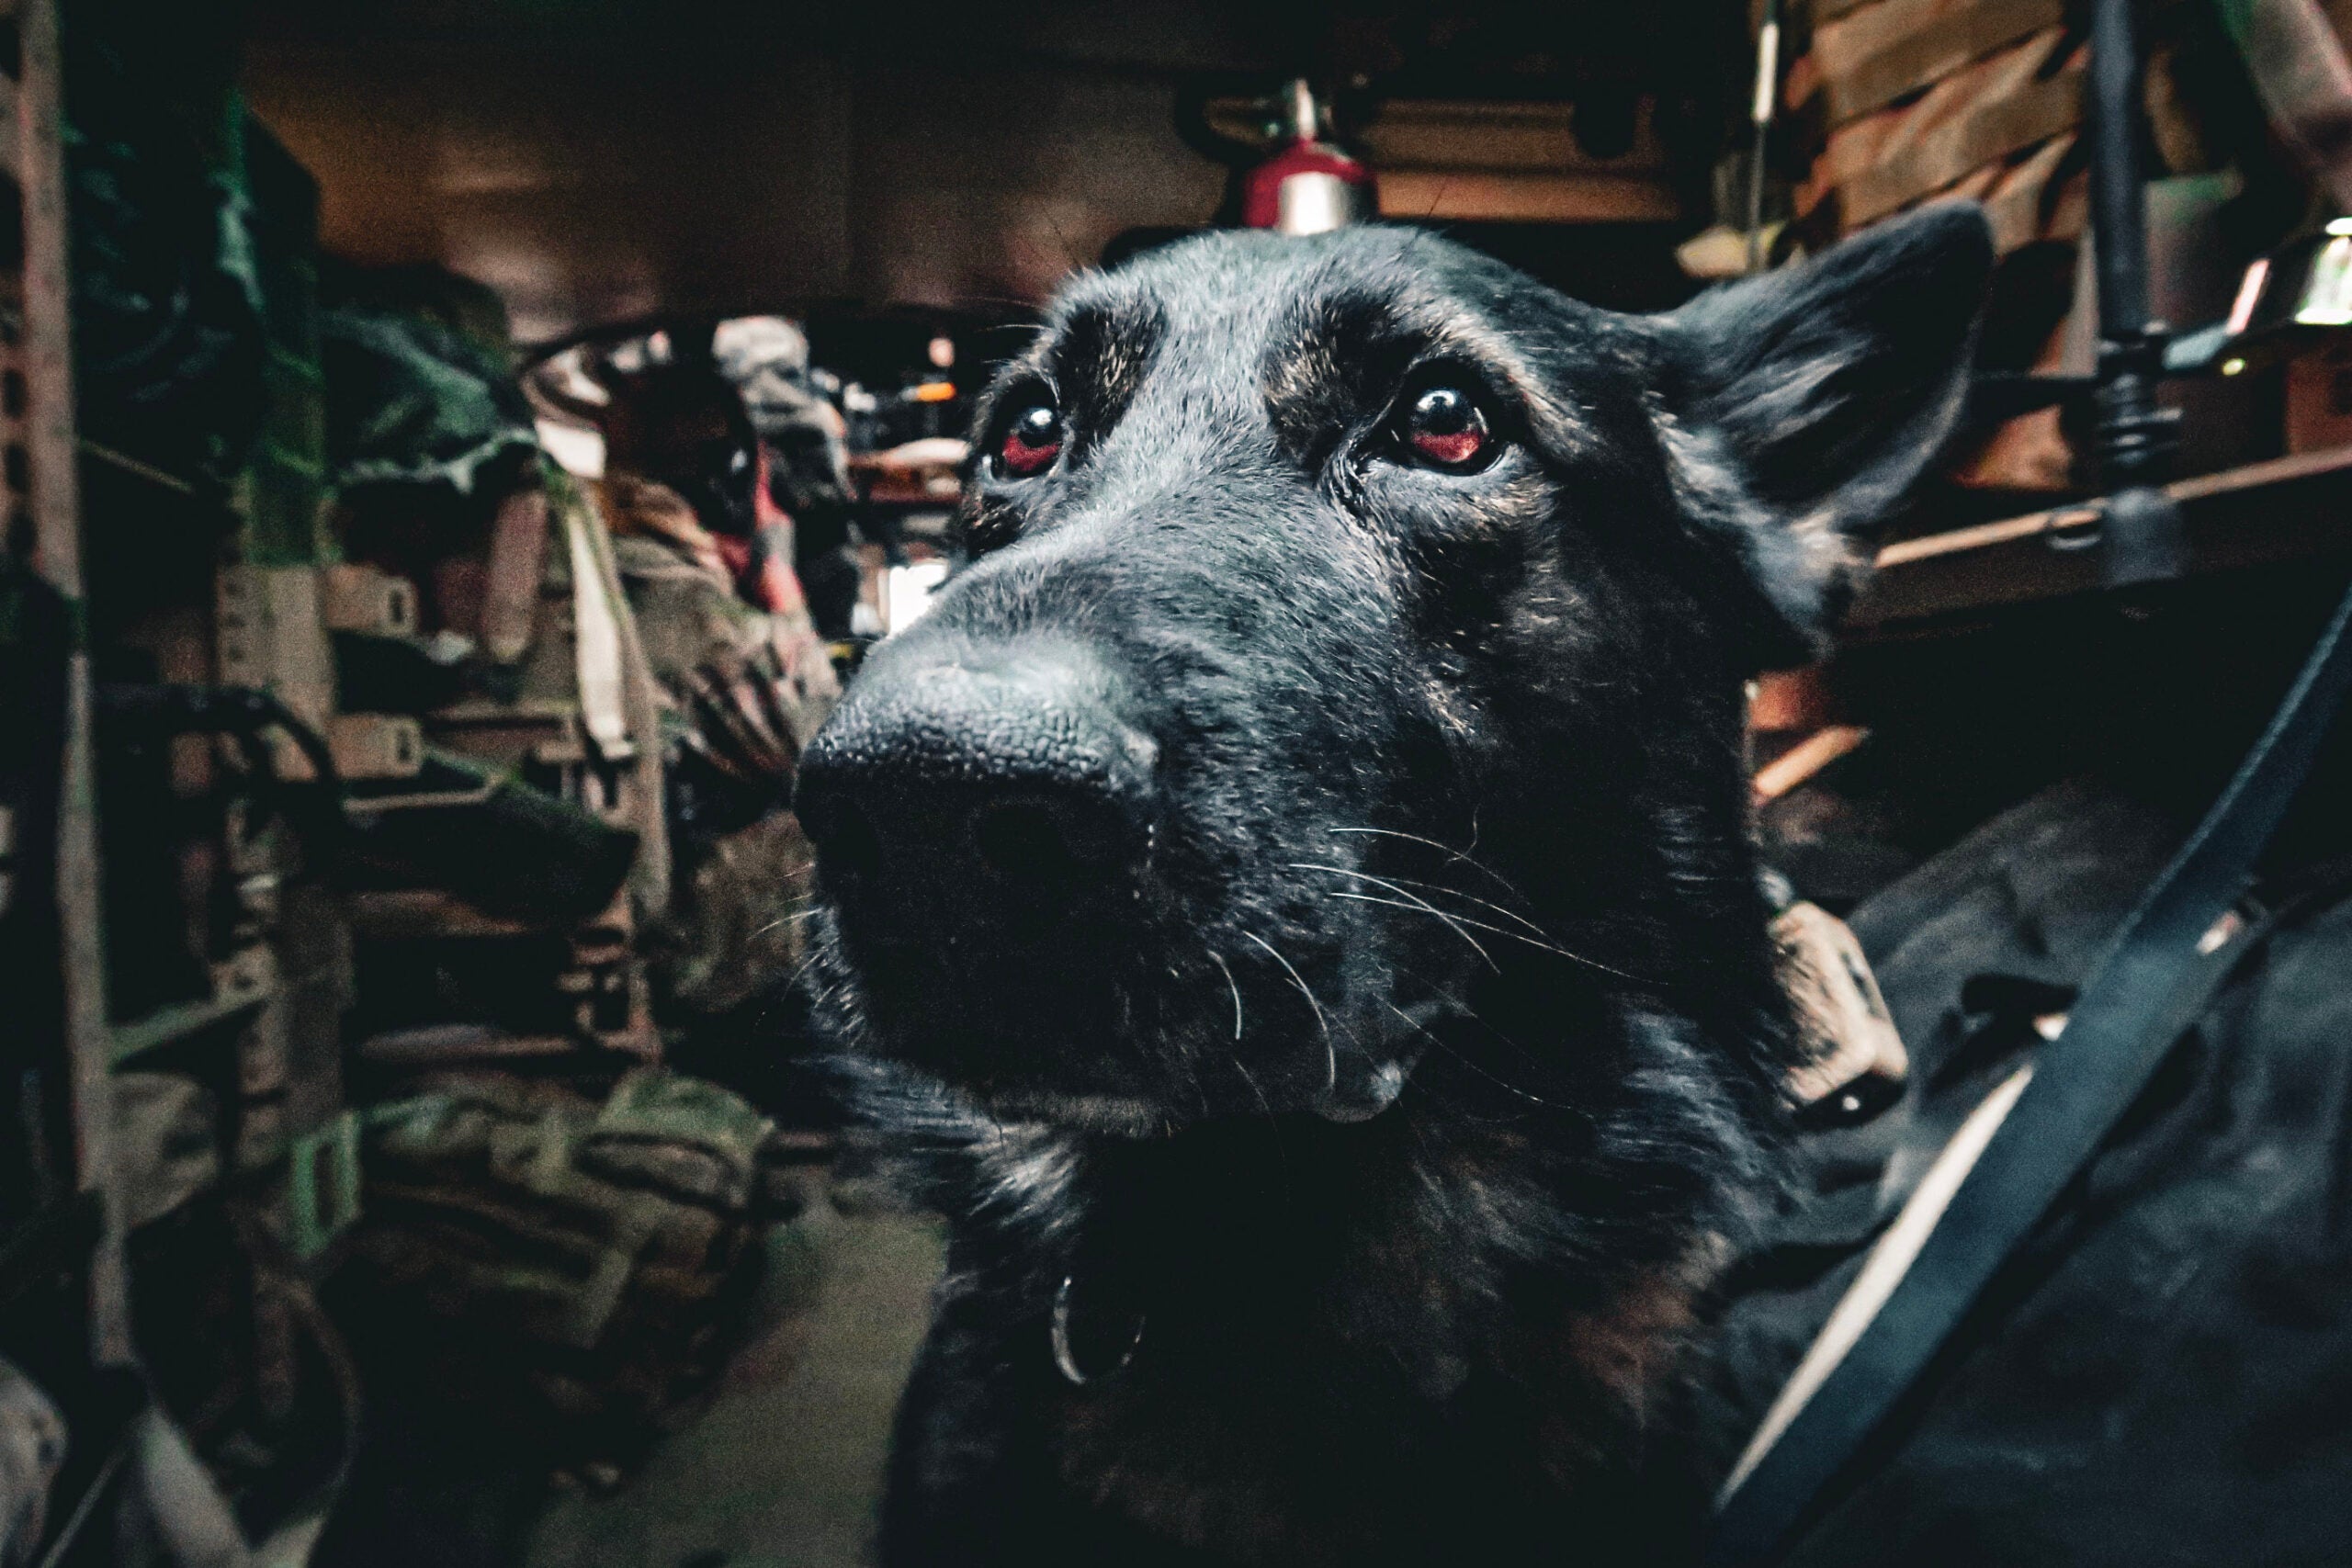 EOD commander reunited with working dog 3 years after patrolling in Afghanistan together